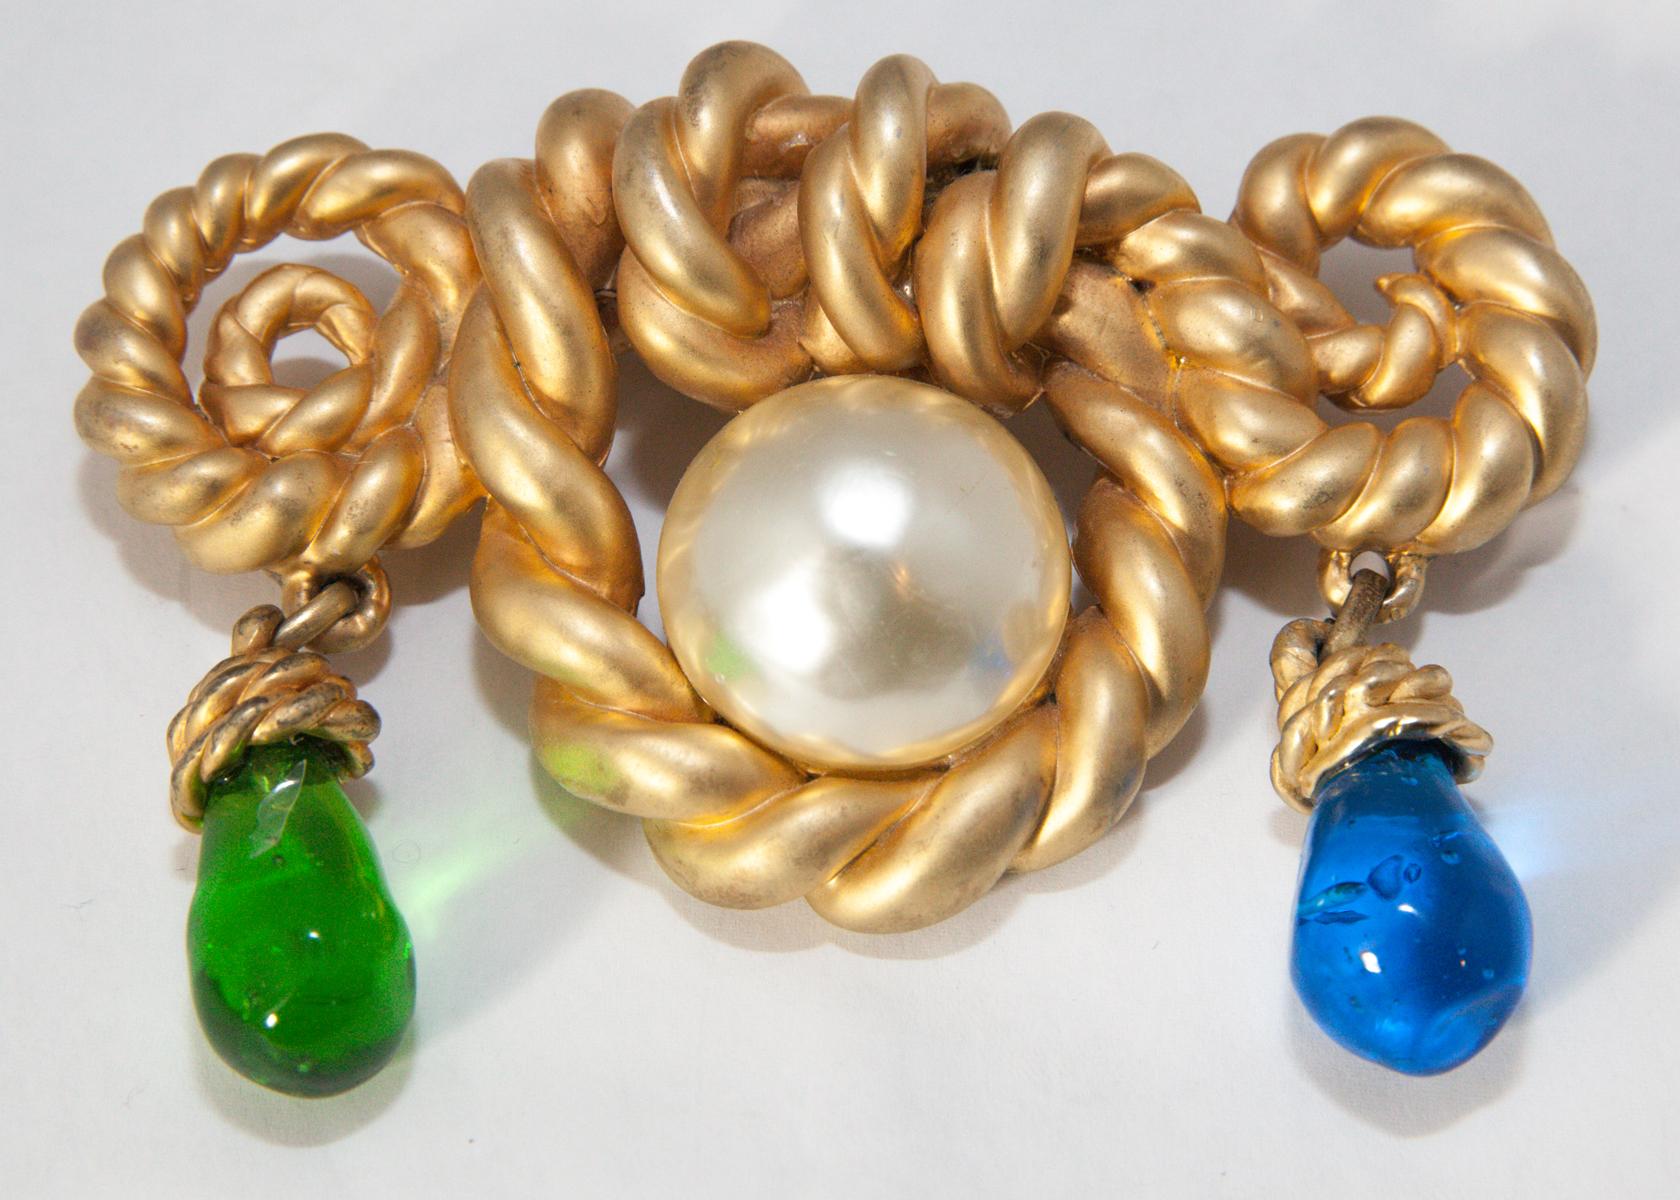 This is a huge, outstanding Chanel brooch.  It has a large twisted rope design with a huge faux pearl center.  Dangling from each side is a large green and blue Gripoix glass drop.  It is in a gold tone setting and measures 4-1/2” wide x 3” long